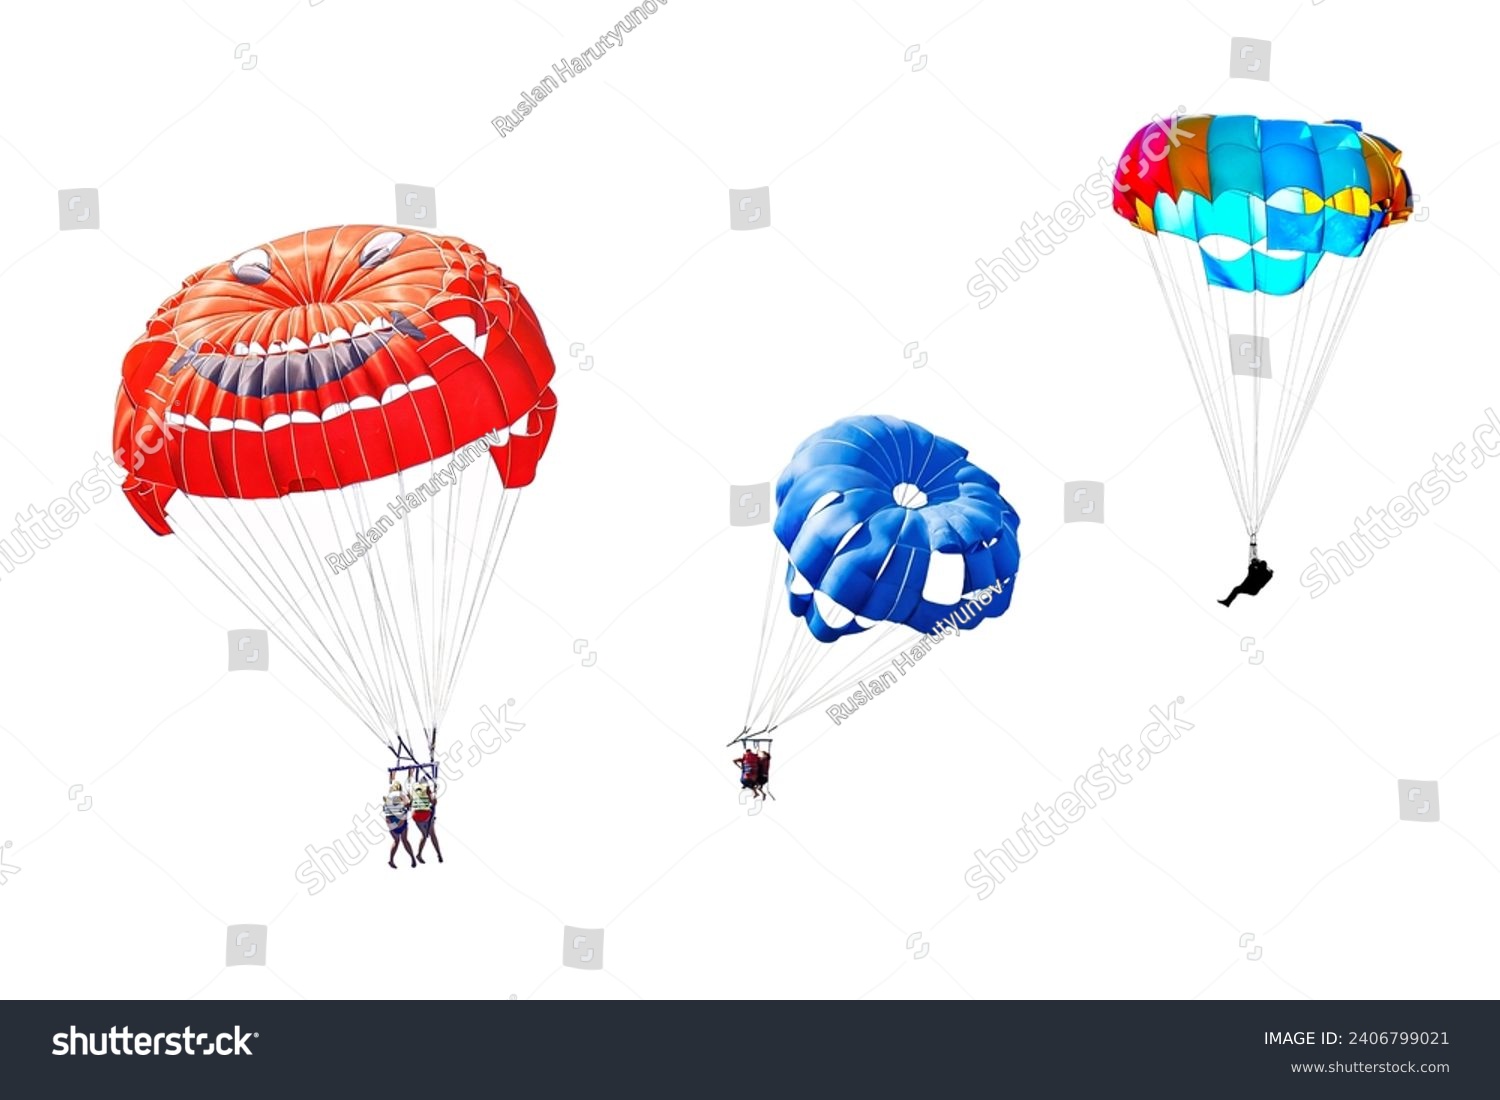 Three different images of skydivers on colorful parachutes isolated on a white background #2406799021